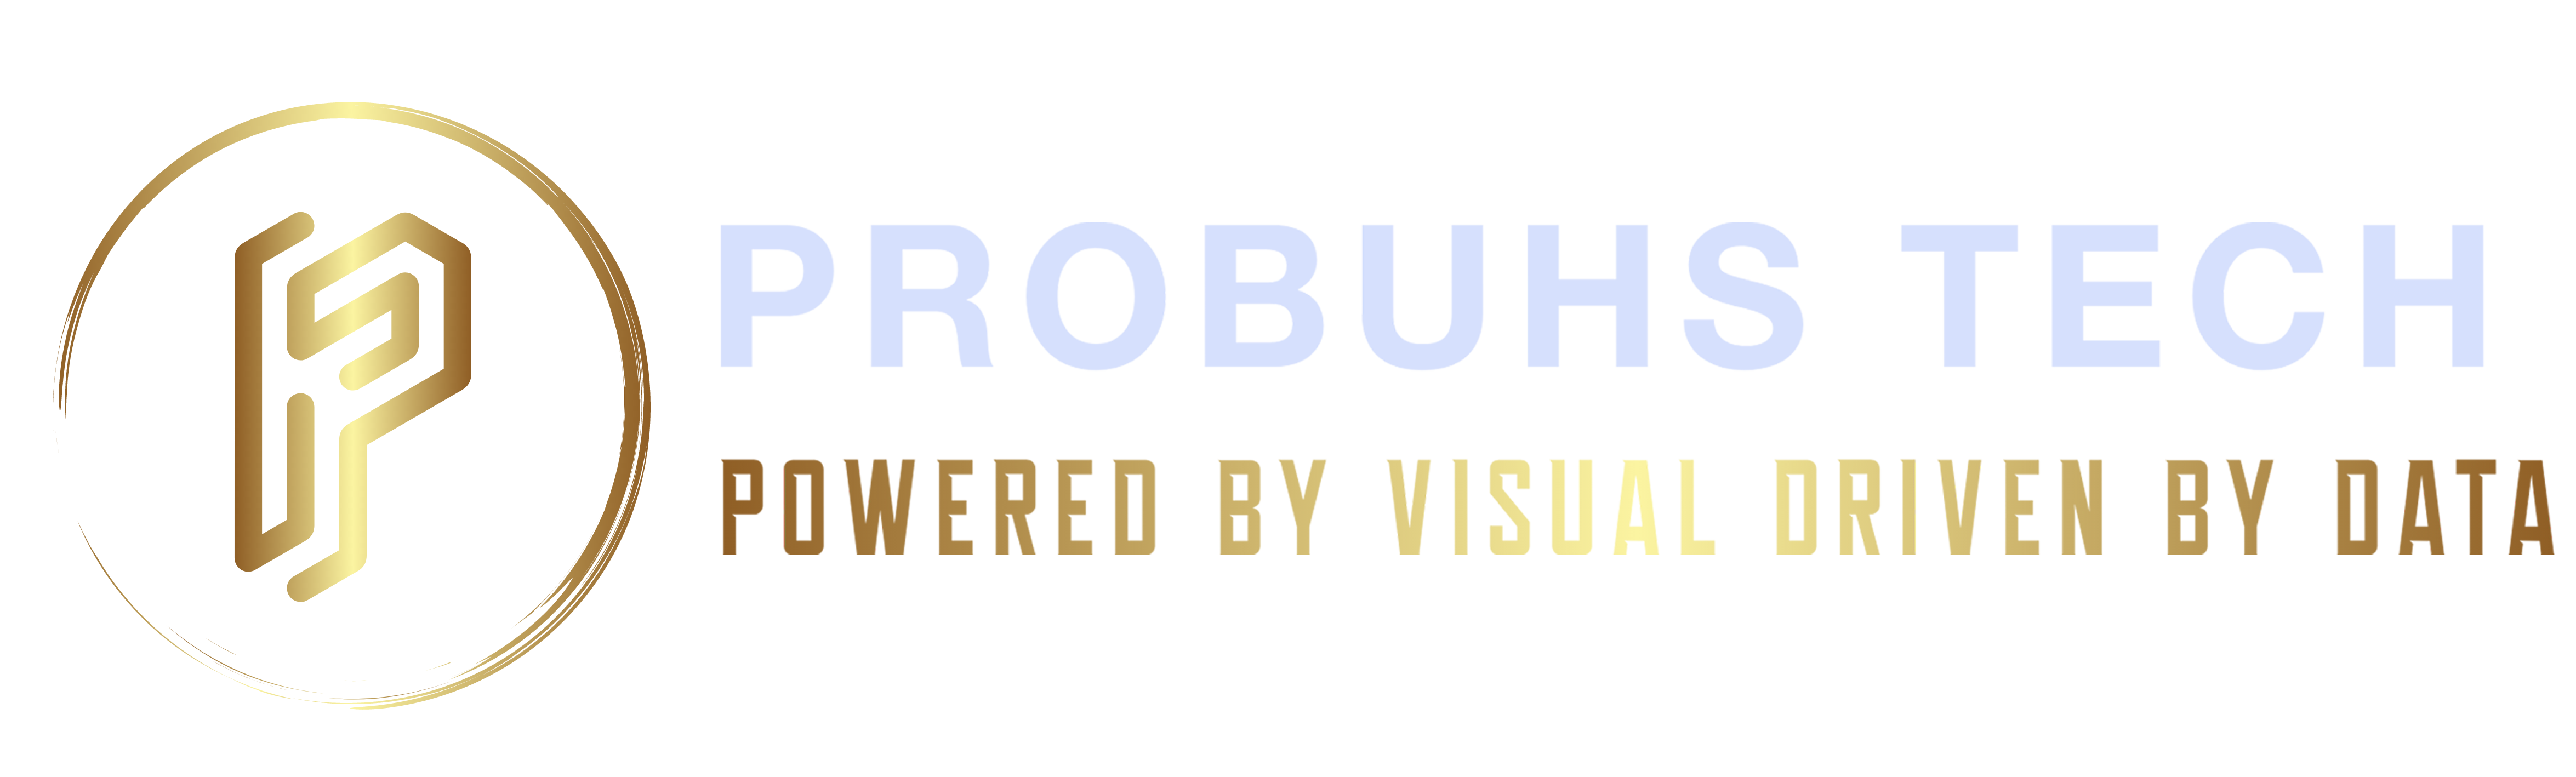 Probuhstech - Where IT Skills and Business Come Together